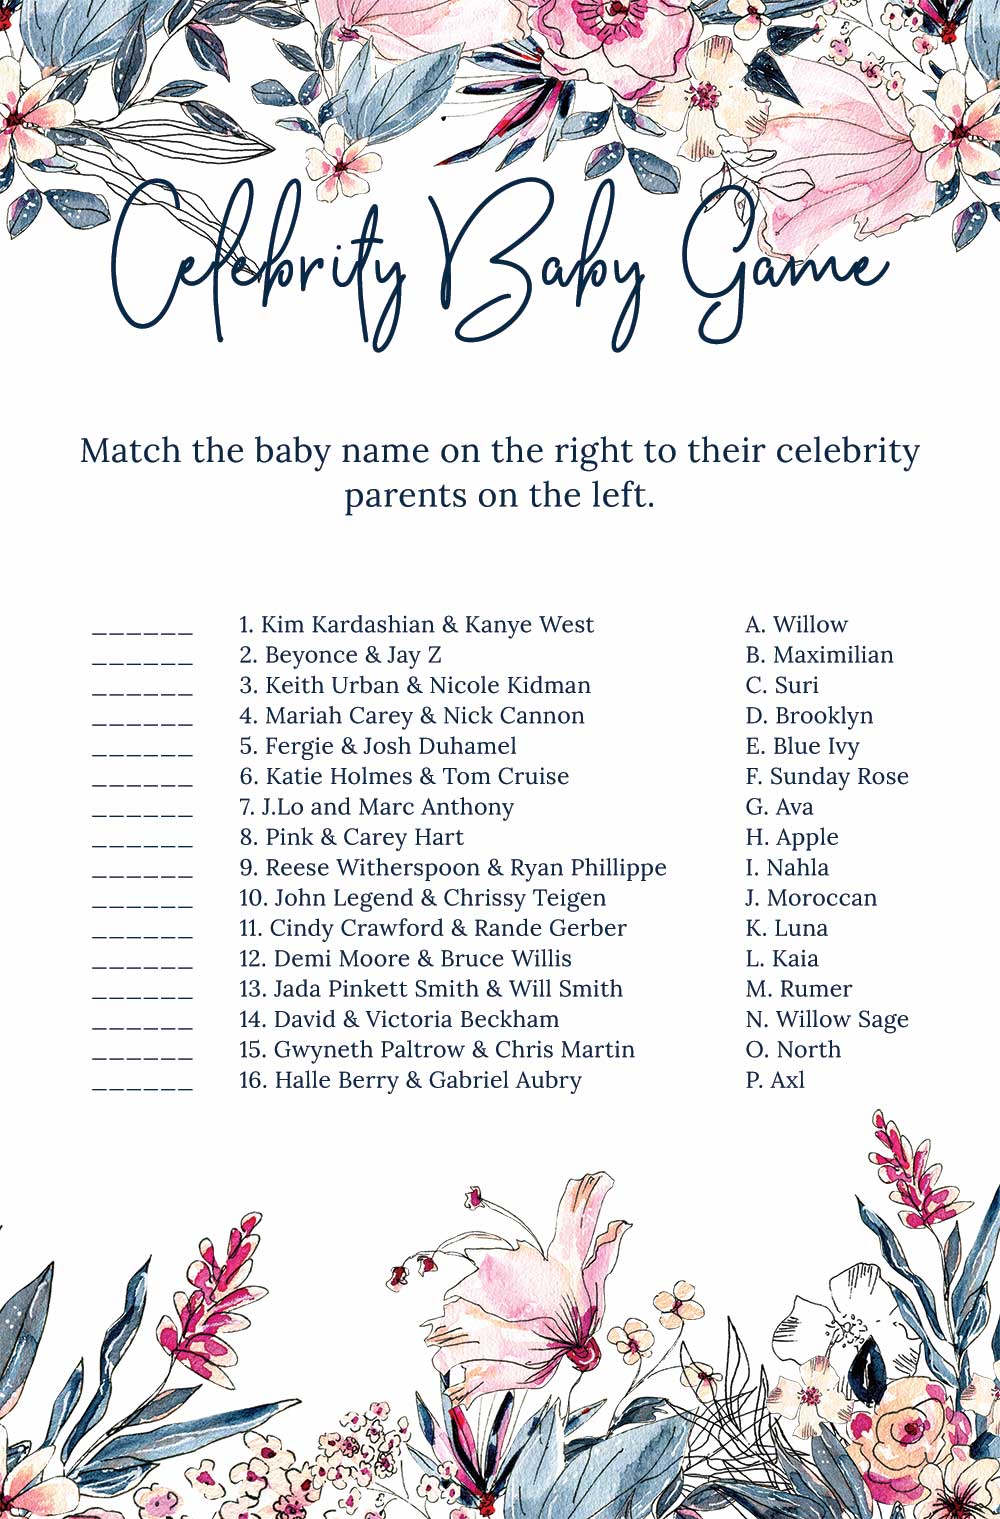 Celebrity baby game - Swan theme